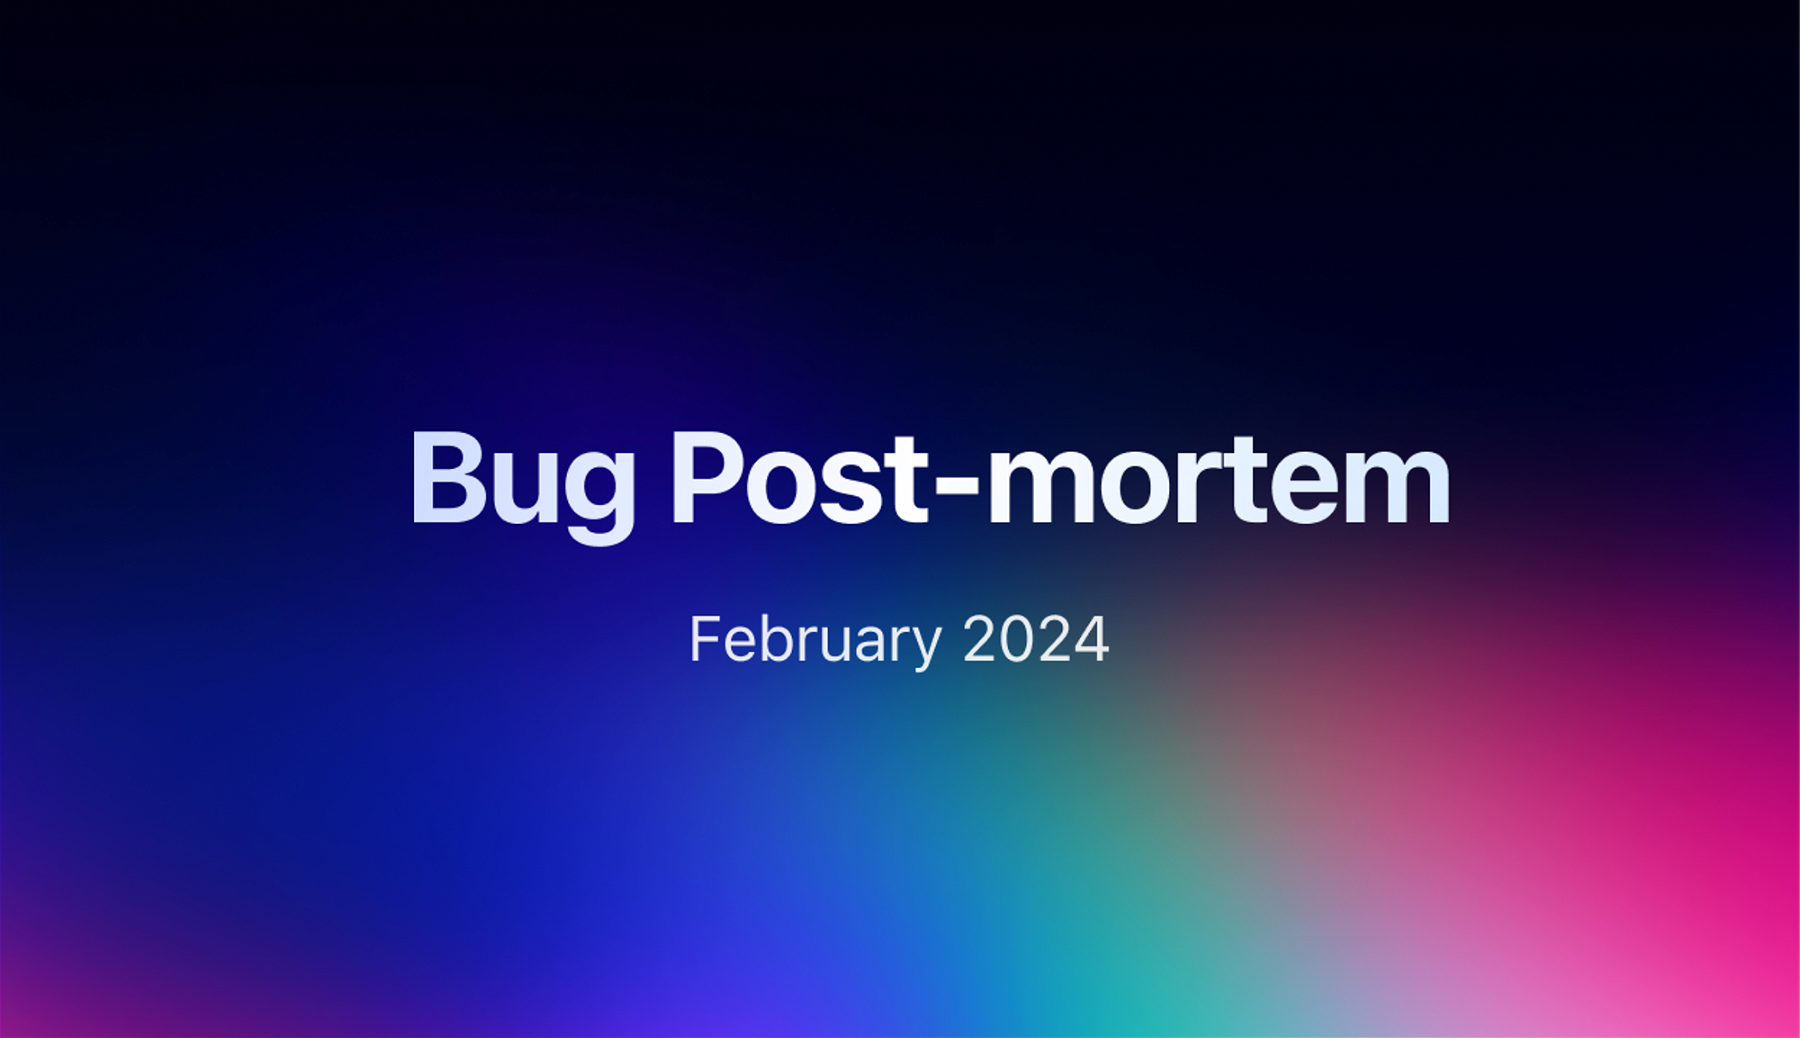 Post-mortem on bugs in February 2024